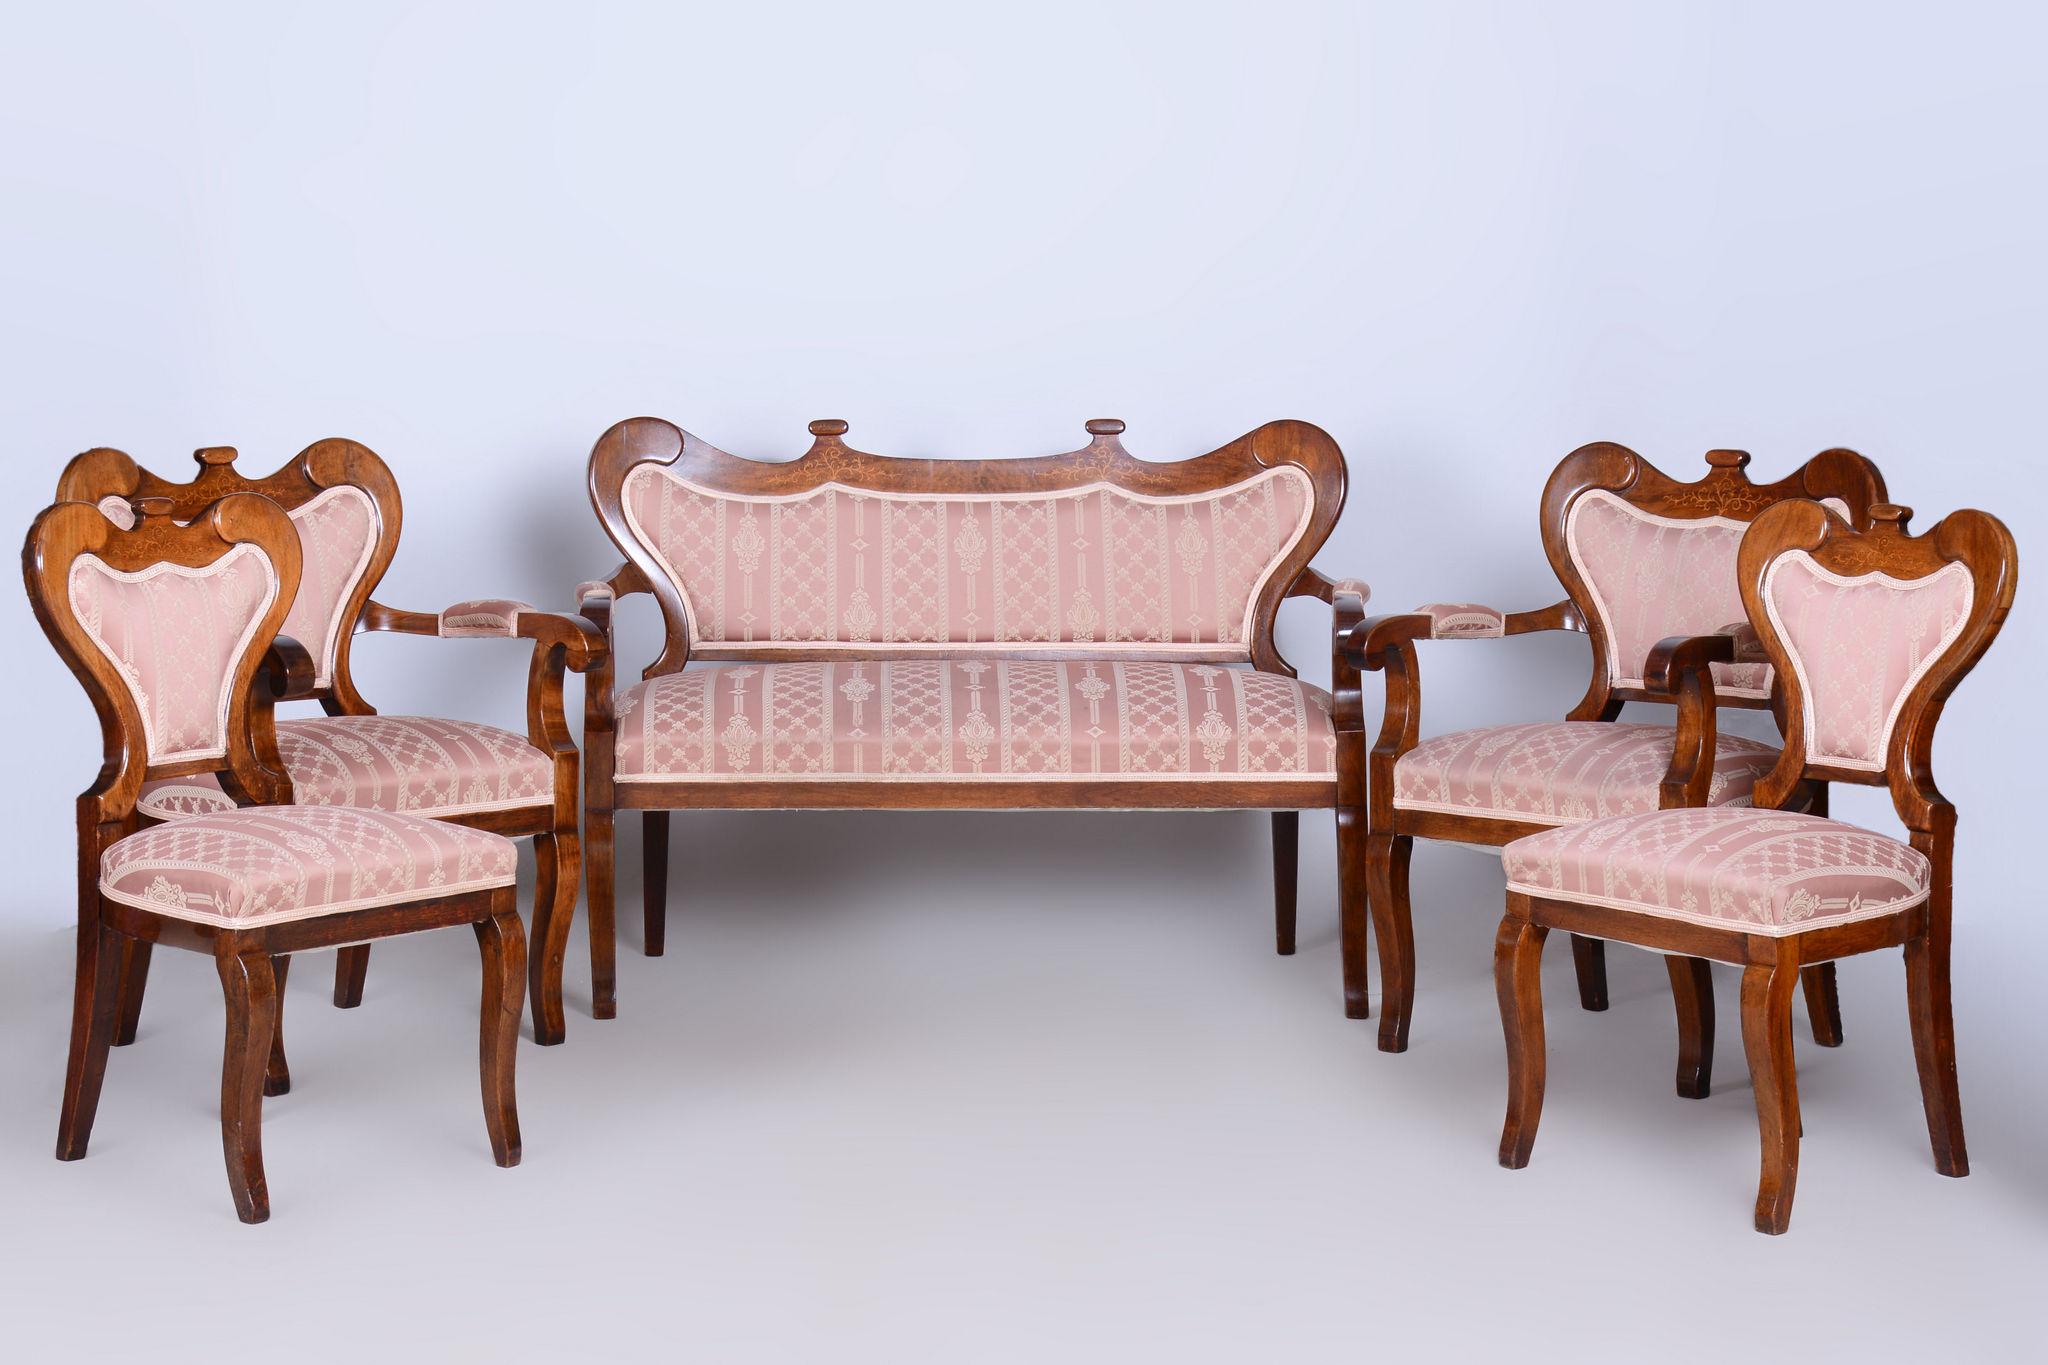 Restored Biedermeier Seating Set (Sofa, 2 Armchairs and 2 Chairs)

Source: Austria
Period: 1840-1849
Material: Oak, Walnut, Fabric

Sofa dimensions:
Height: 92 cm (36.2 in)
Width: 131 cm (51.6 in)
Depth: 67 cm (26.4 in)
Seat height: 48 cm (33.1